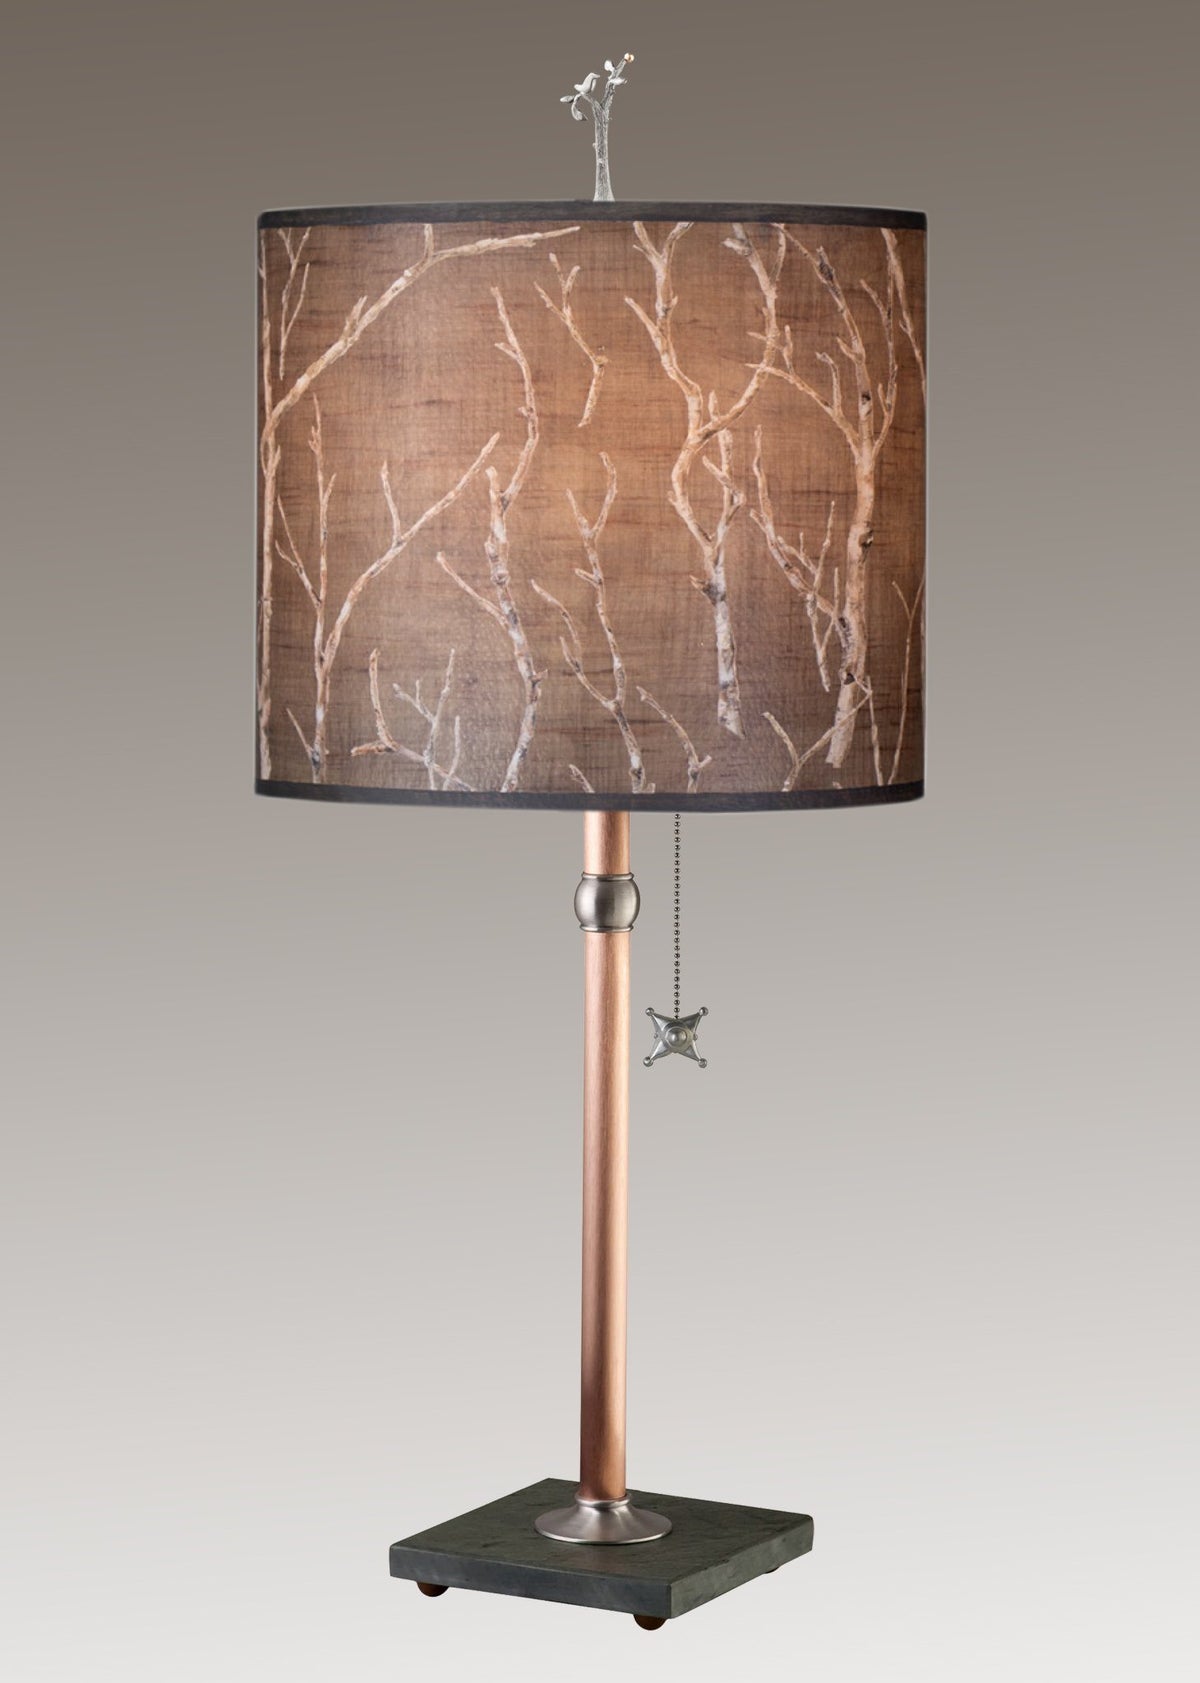 Copper Table Lamp with Large Oval Shade in Twigs